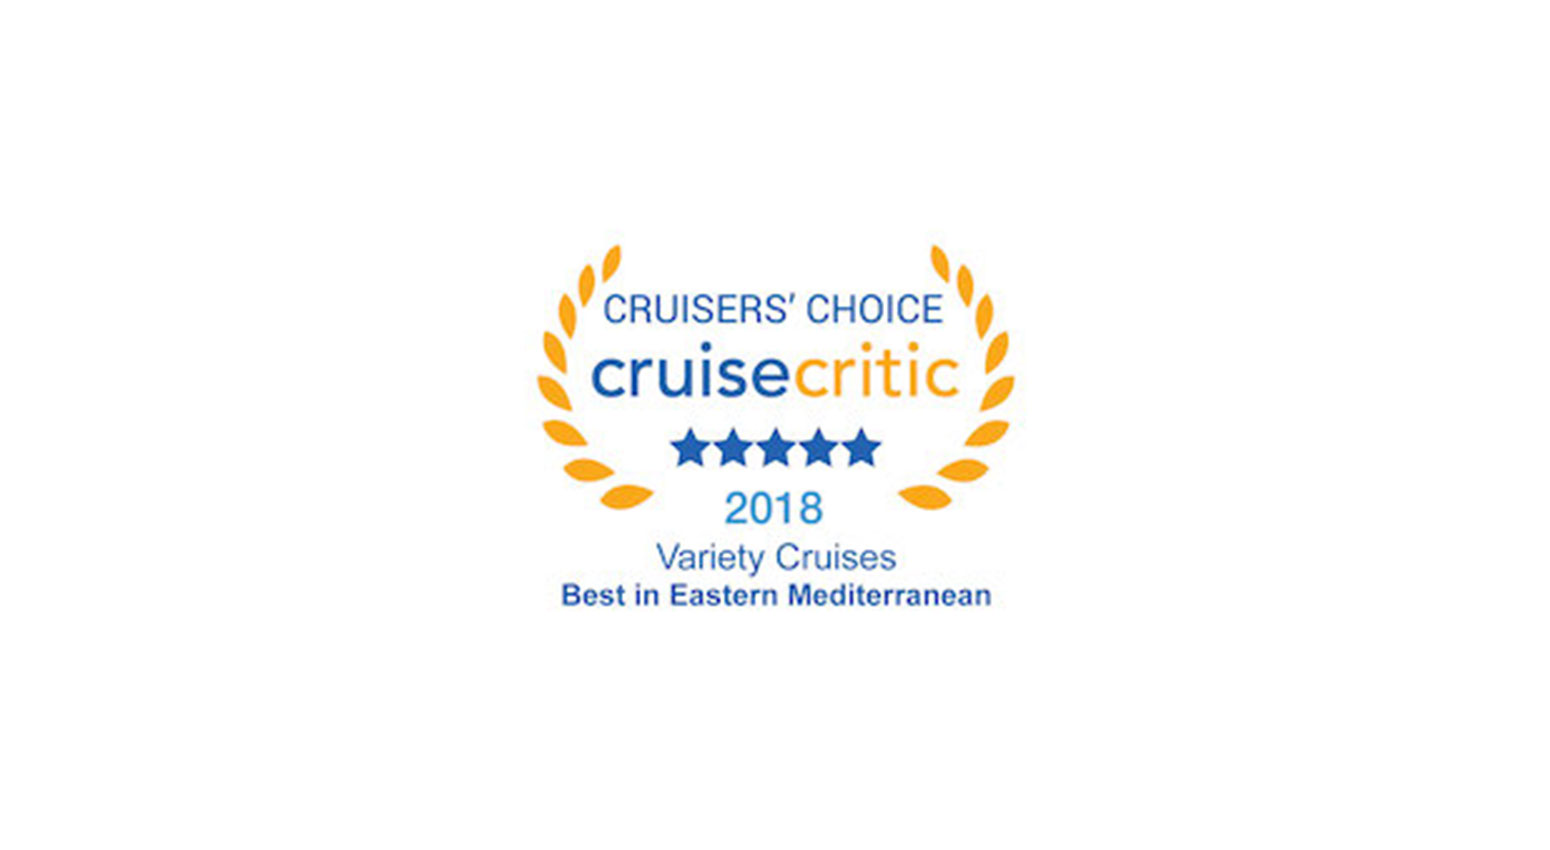 Variety Cruises rated 5 stars on Cruise Critic